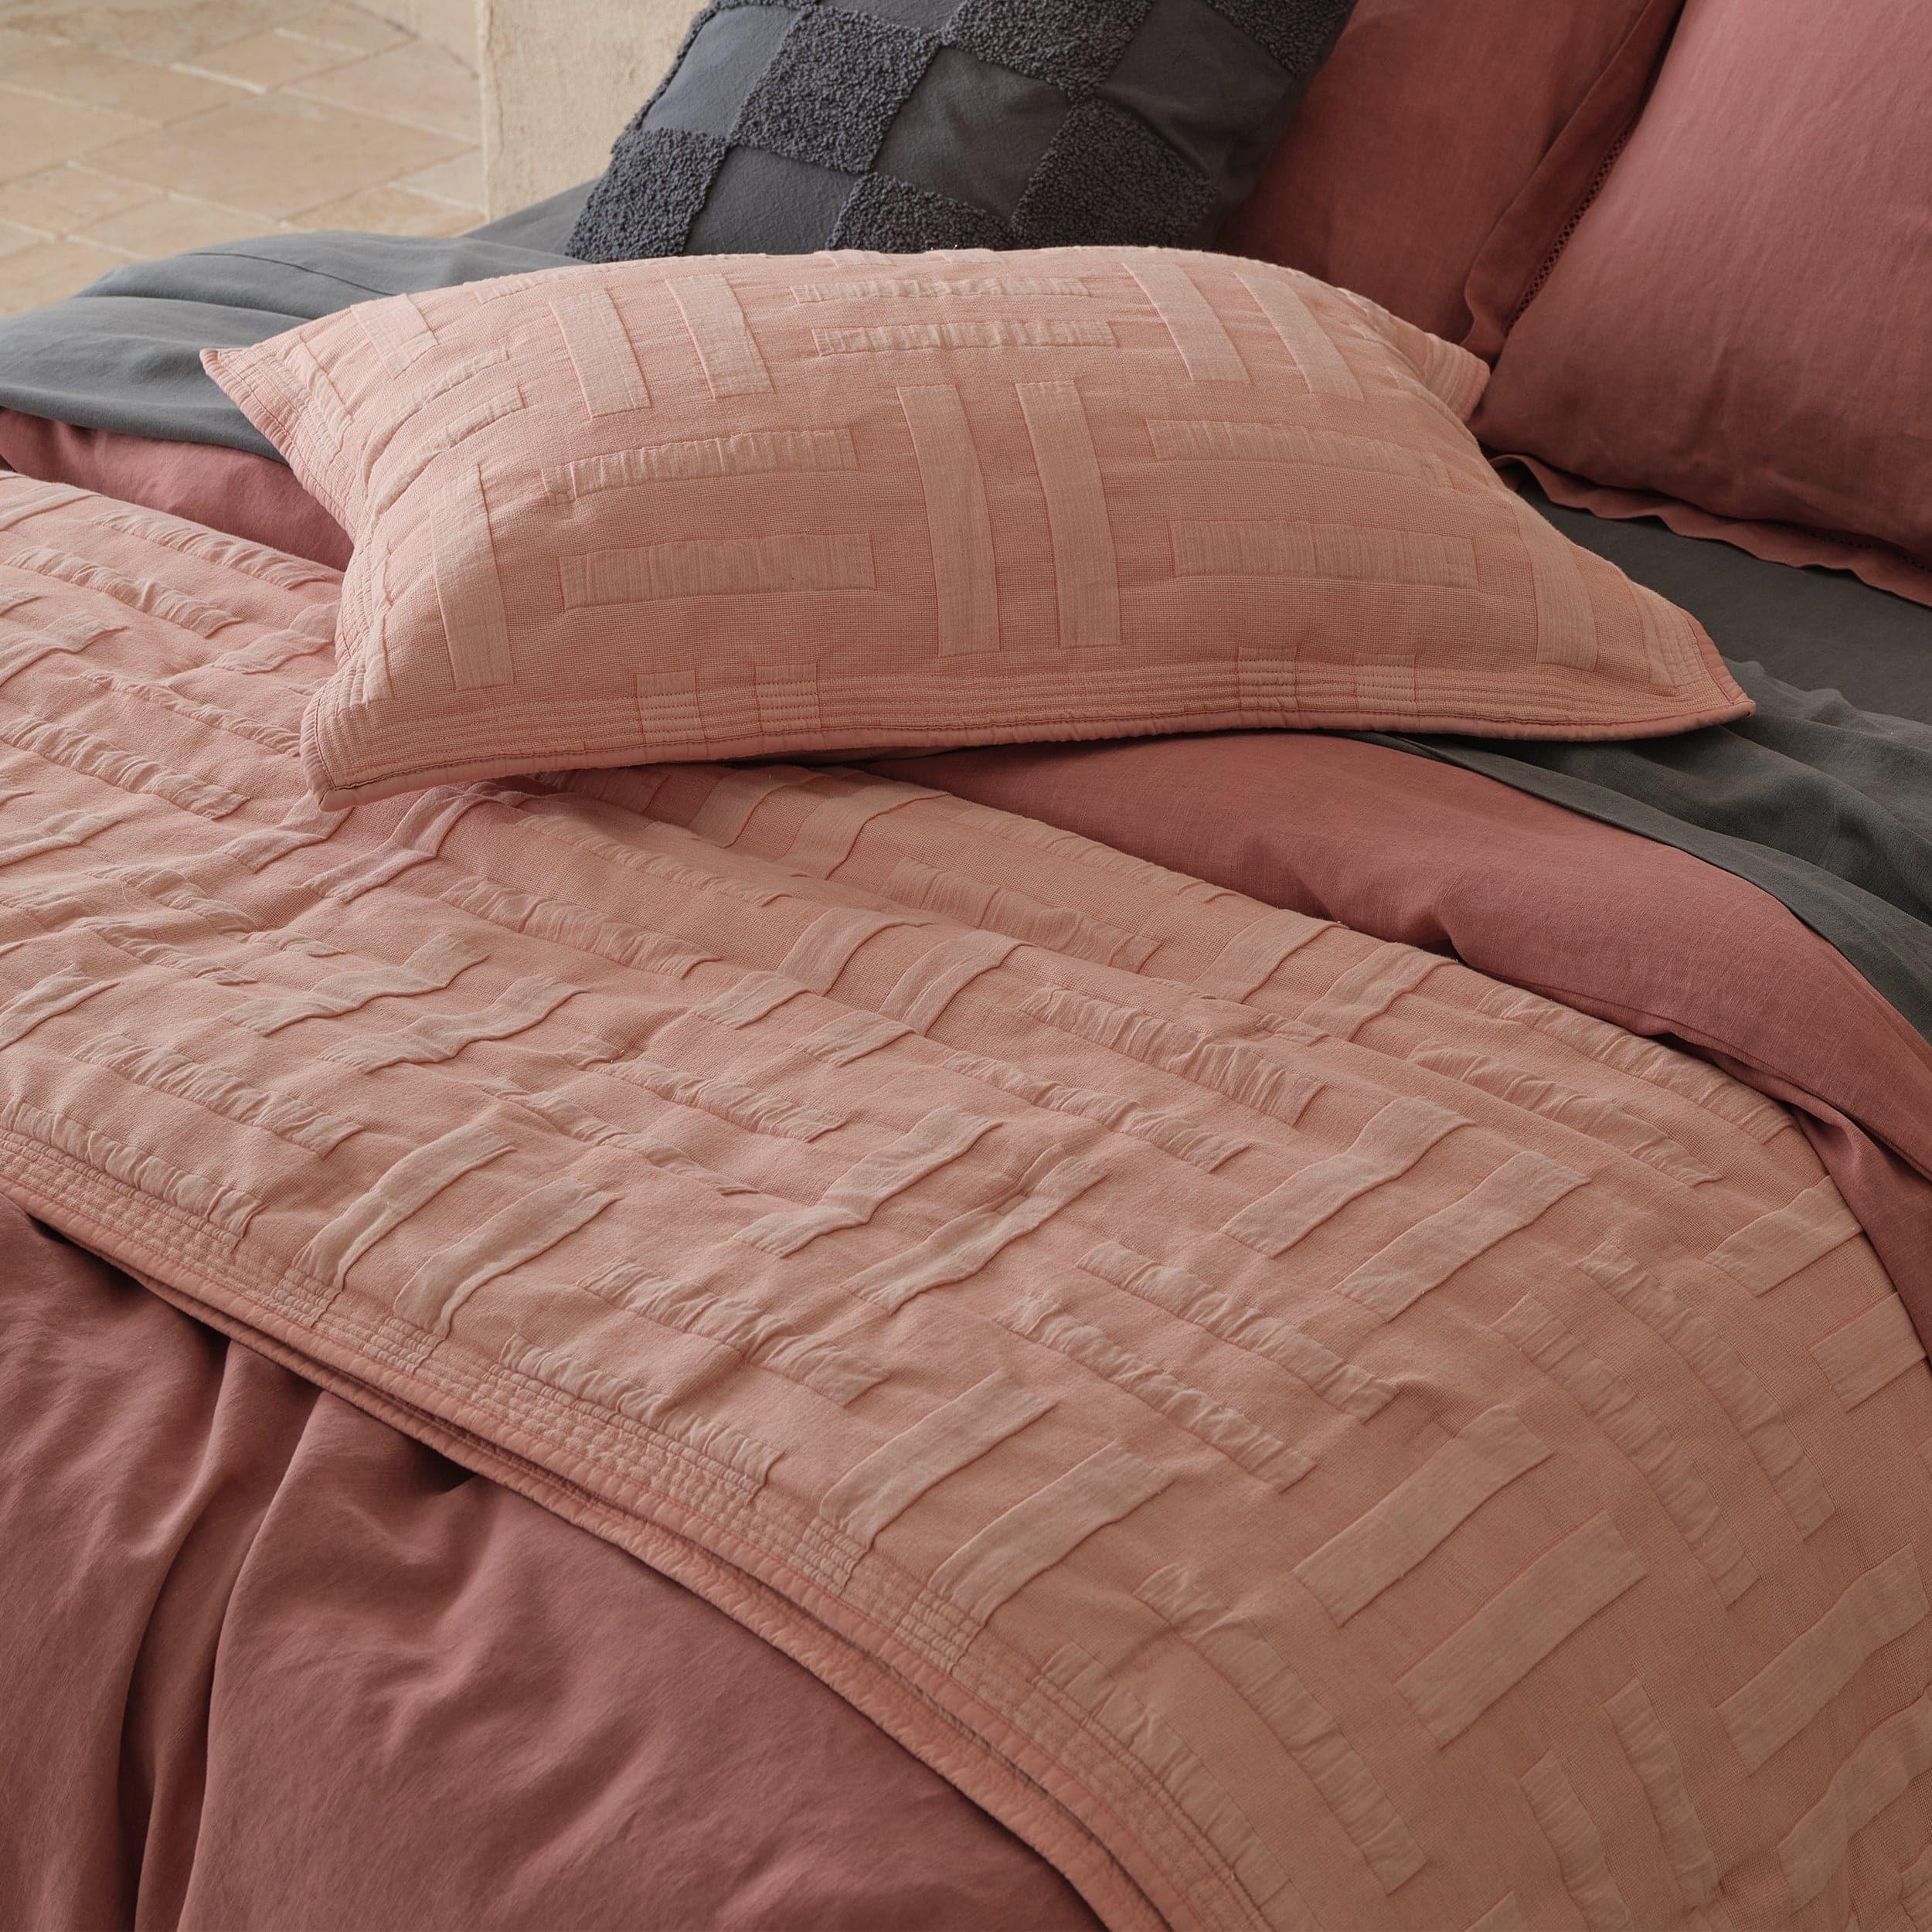 Our queen quilt sets are not only visually appealing but also durable, ensuring long-lasting beauty and functionality.